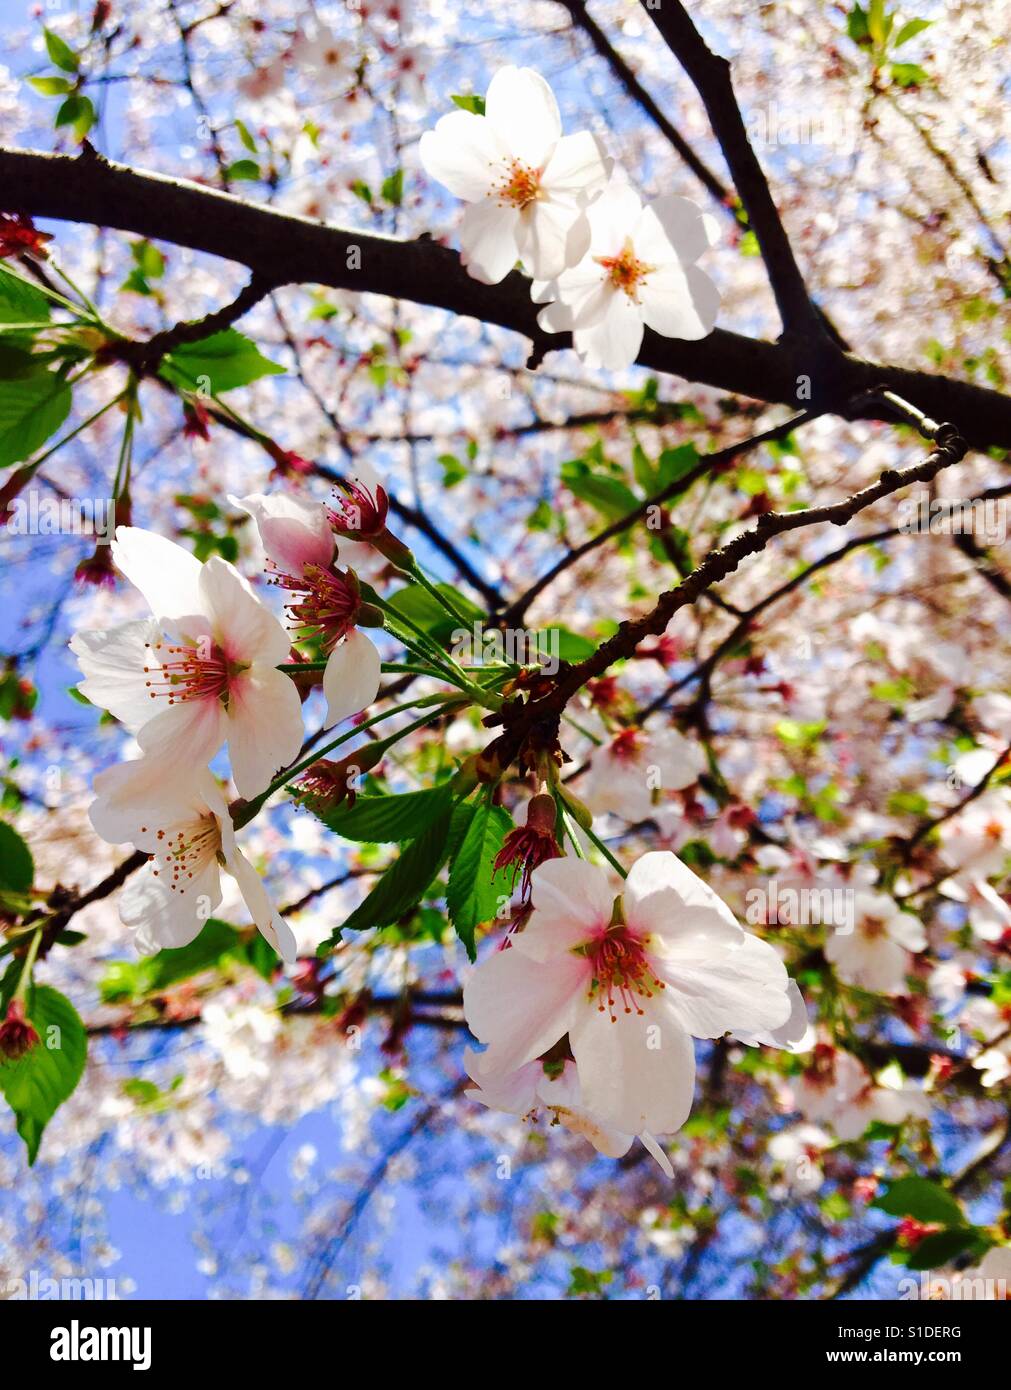 Cherry blossoms in spring Stock Photo